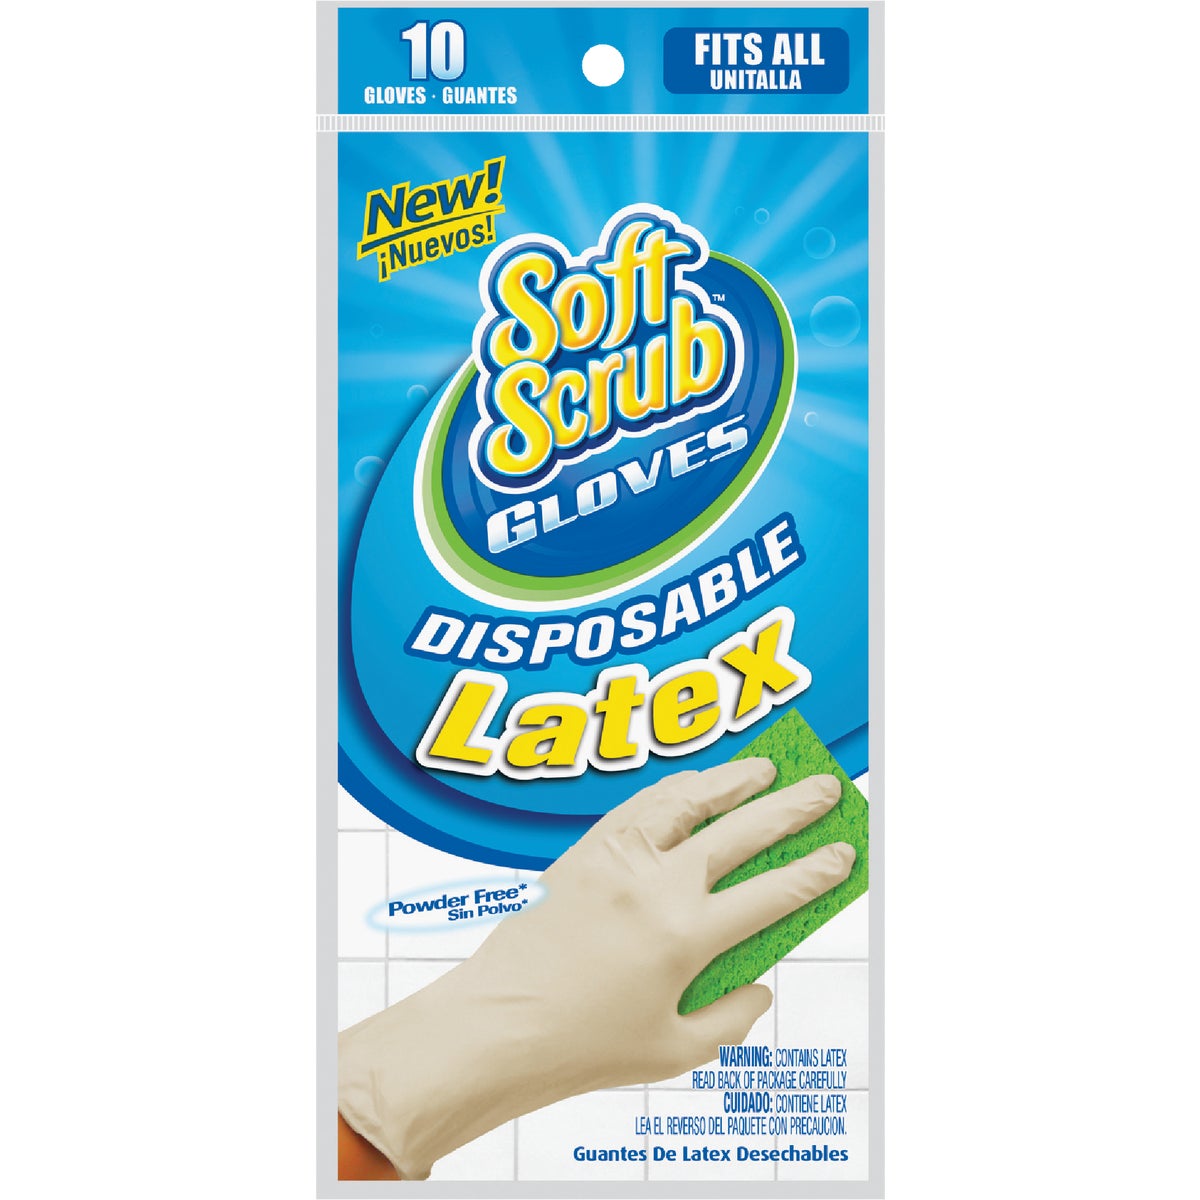 Item 613474, Latex disposable gloves. One sizs fits all.